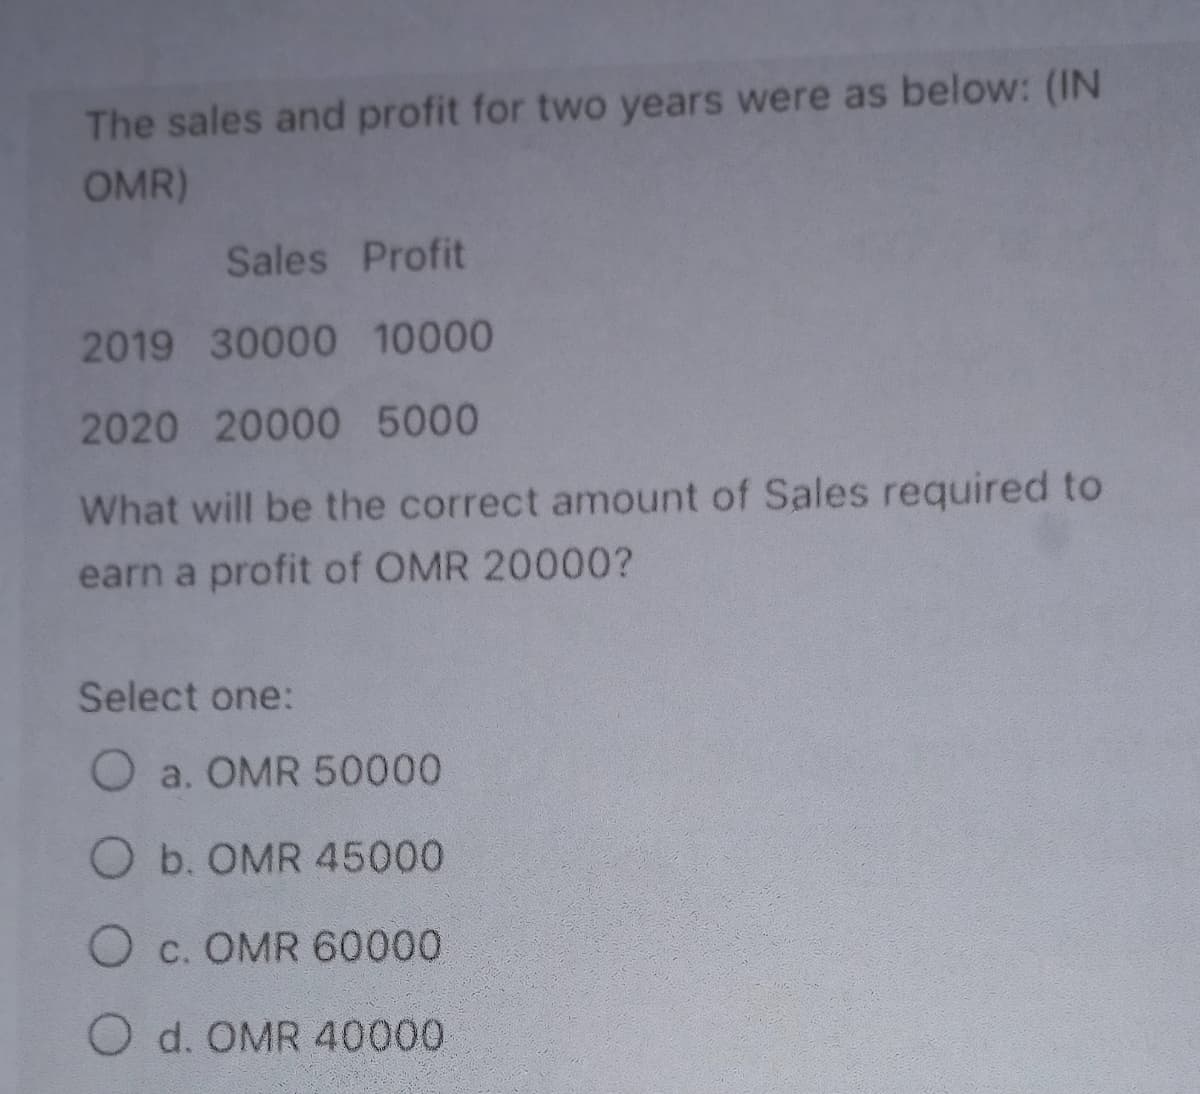 The sales and profit for two years were as below: (IN
OMR)
Sales Profit
2019 30000 10000
2020 20000 5000
What will be the correct amount of Sales required to
earn a profit of OMR 20000?
Select one:
O a. OMR 50000
O b. OMR 45000
O c. OMR 60000
O d. OMR 40000
